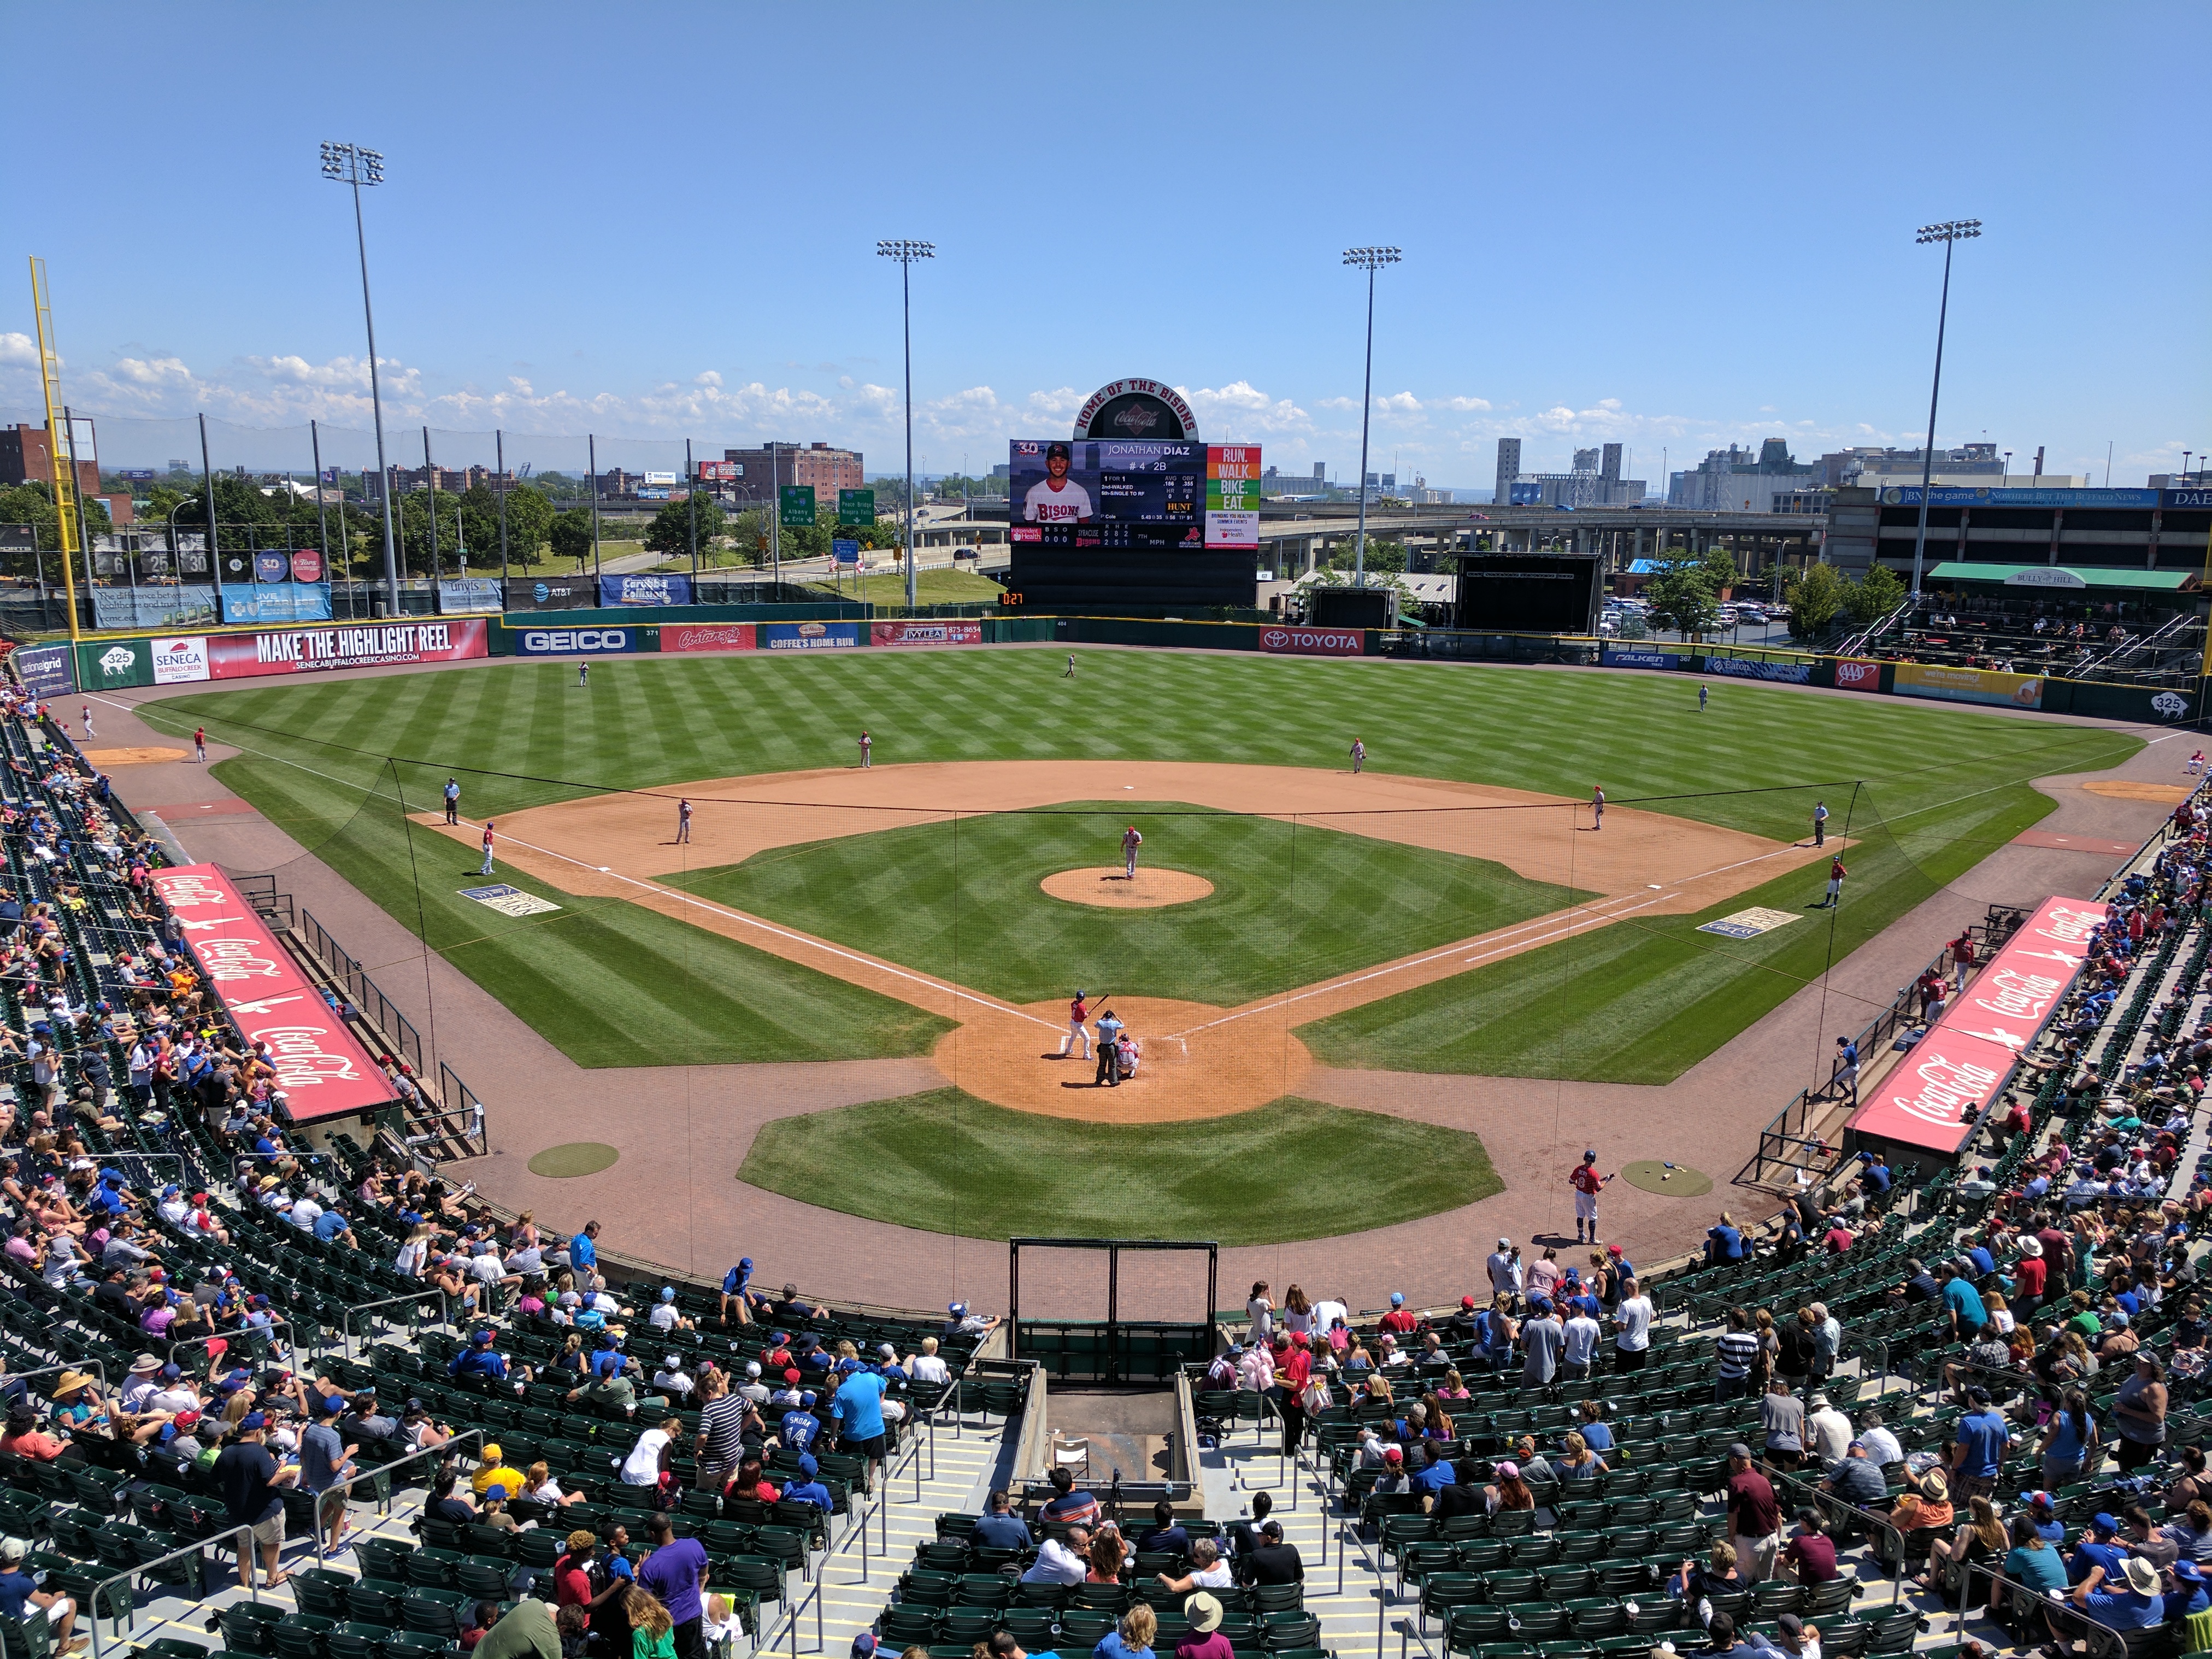 A Buffalo Bisons game at Sahlen Field (formerly Coca-Coal Field) in Buffalo, NY.